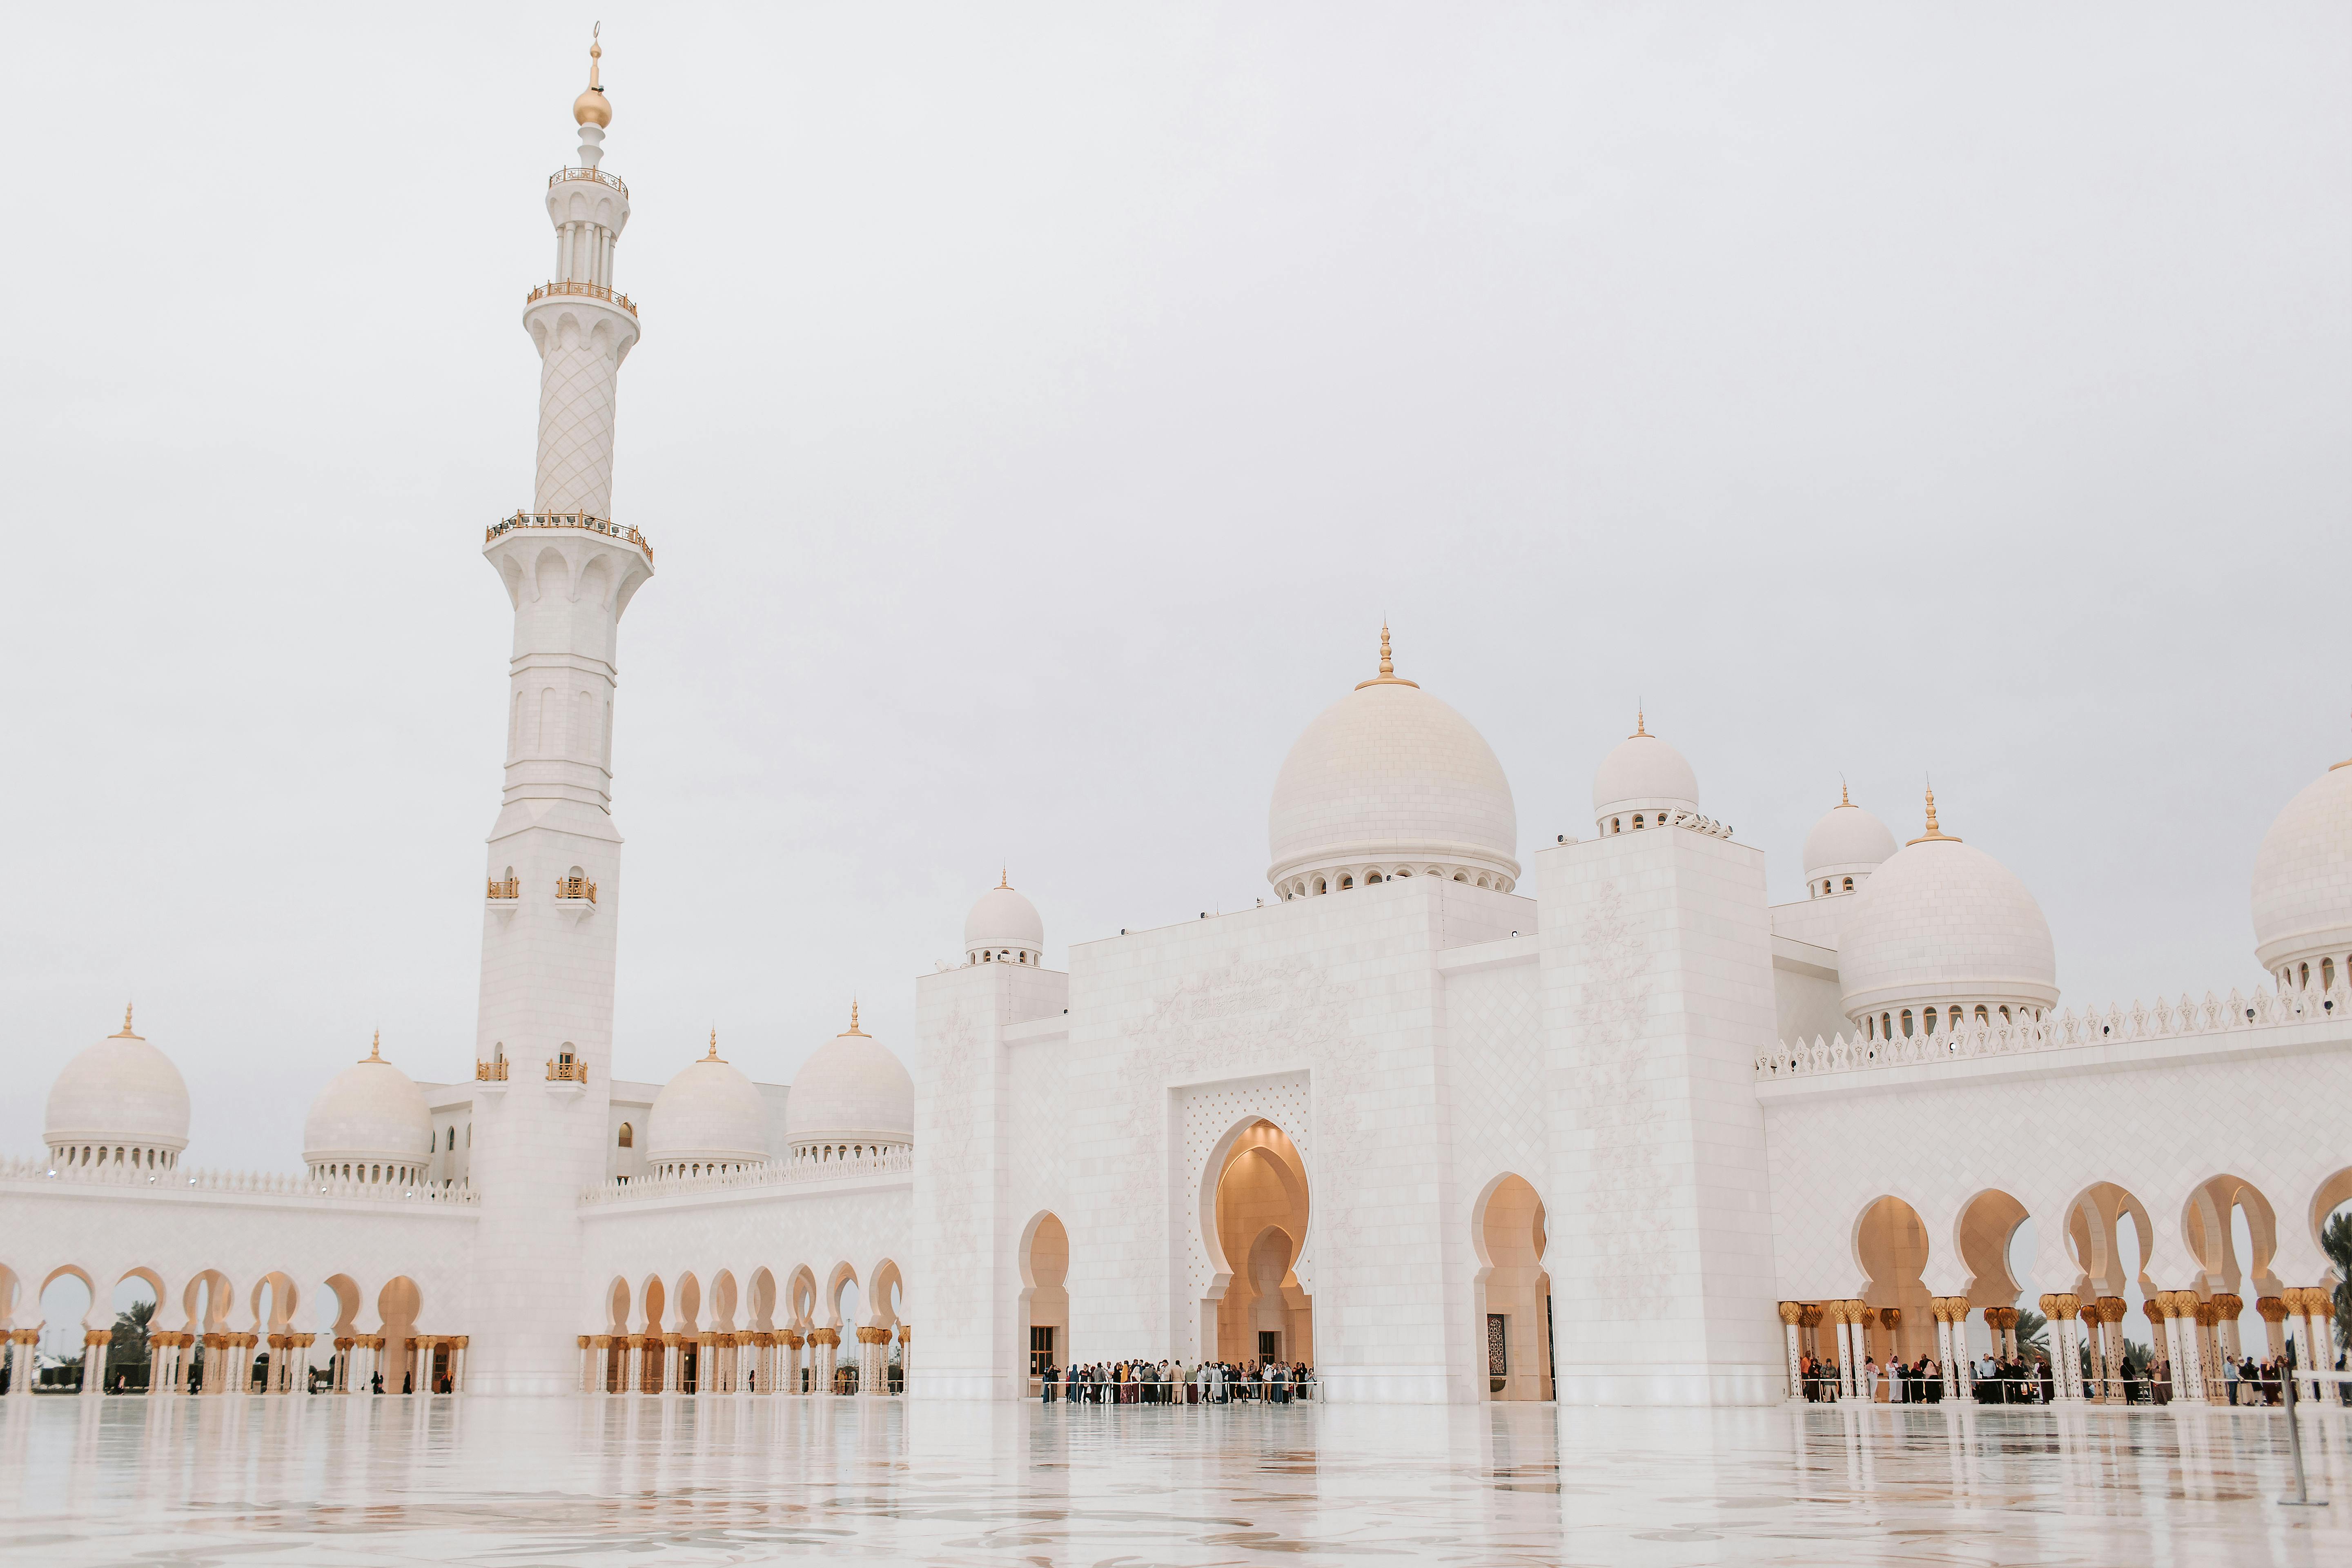 350+ Mosque Pictures [HD] | Download Free Images on Unsplash